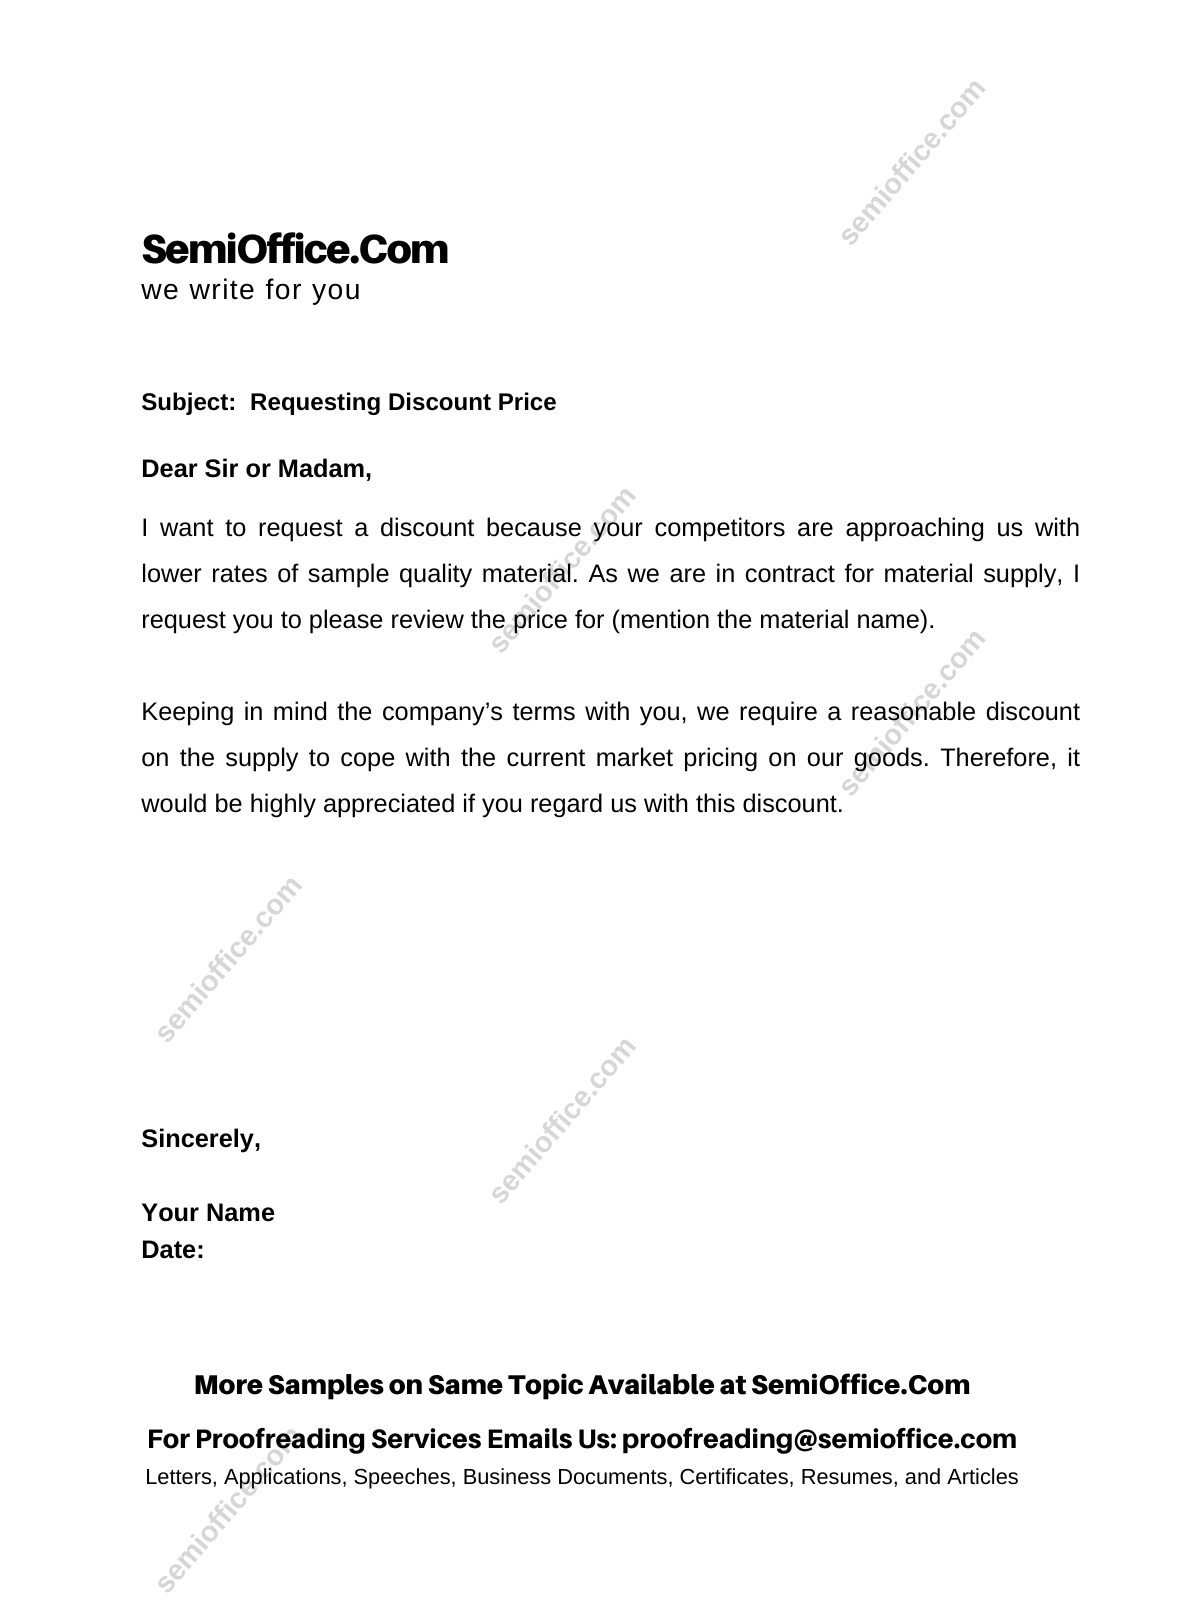 discount-request-letter-to-supplier-by-the-purchaser-semioffice-com